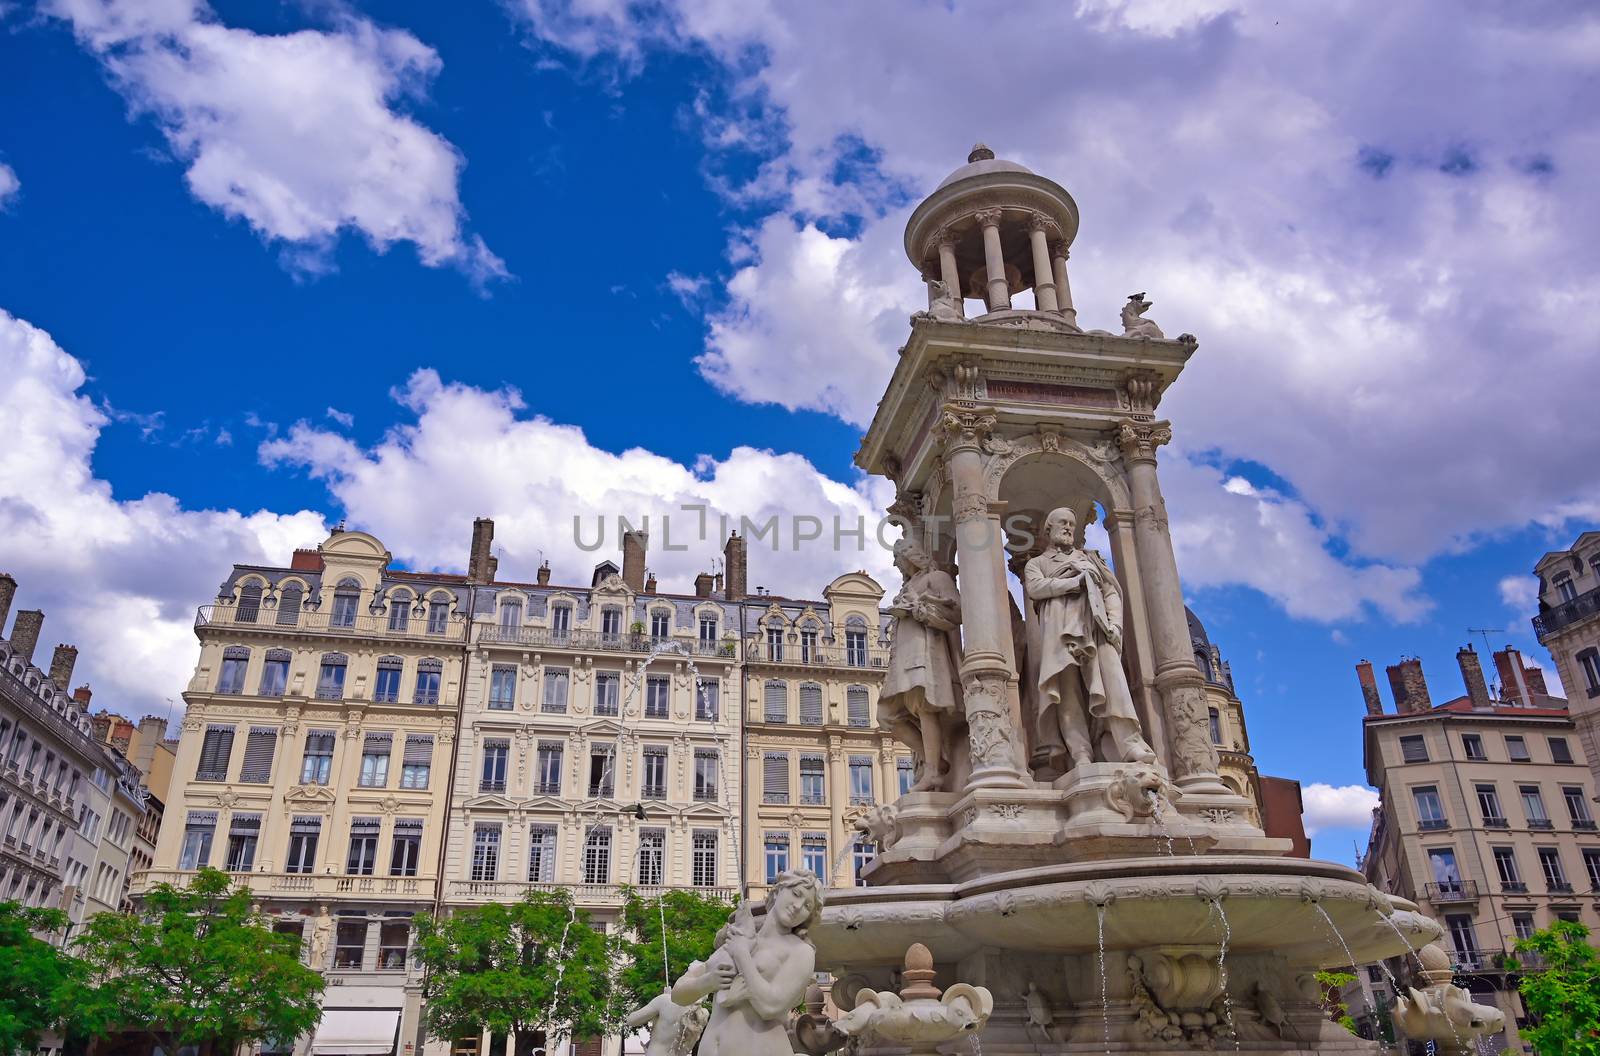 The fountain on Place des Jacobins in Lyon, France by jbyard22